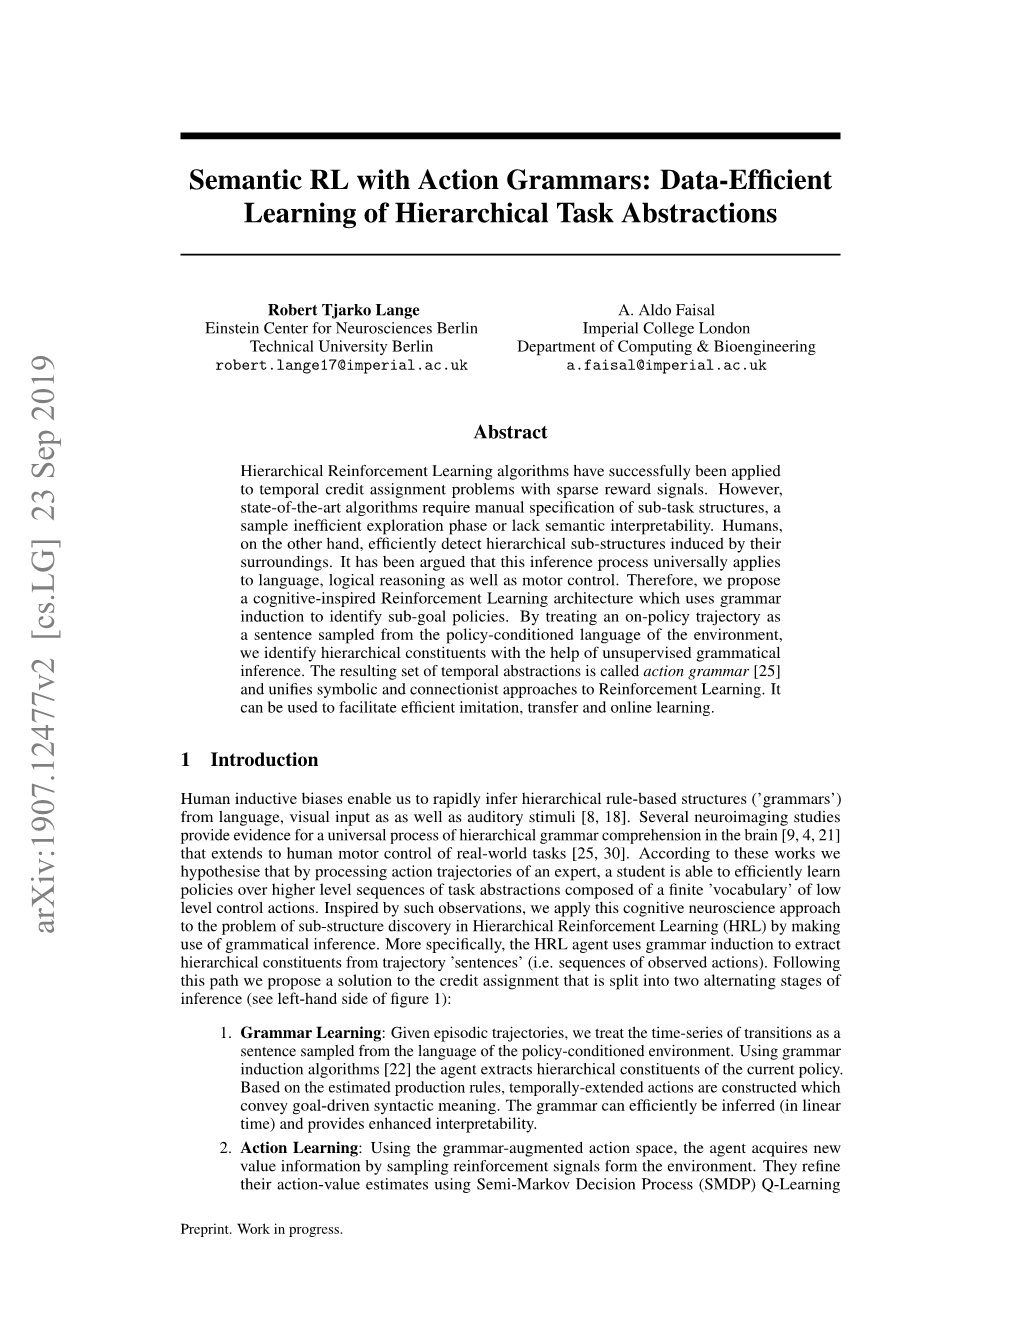 Semantic RL with Action Grammars: Data-Efficient Learning Of